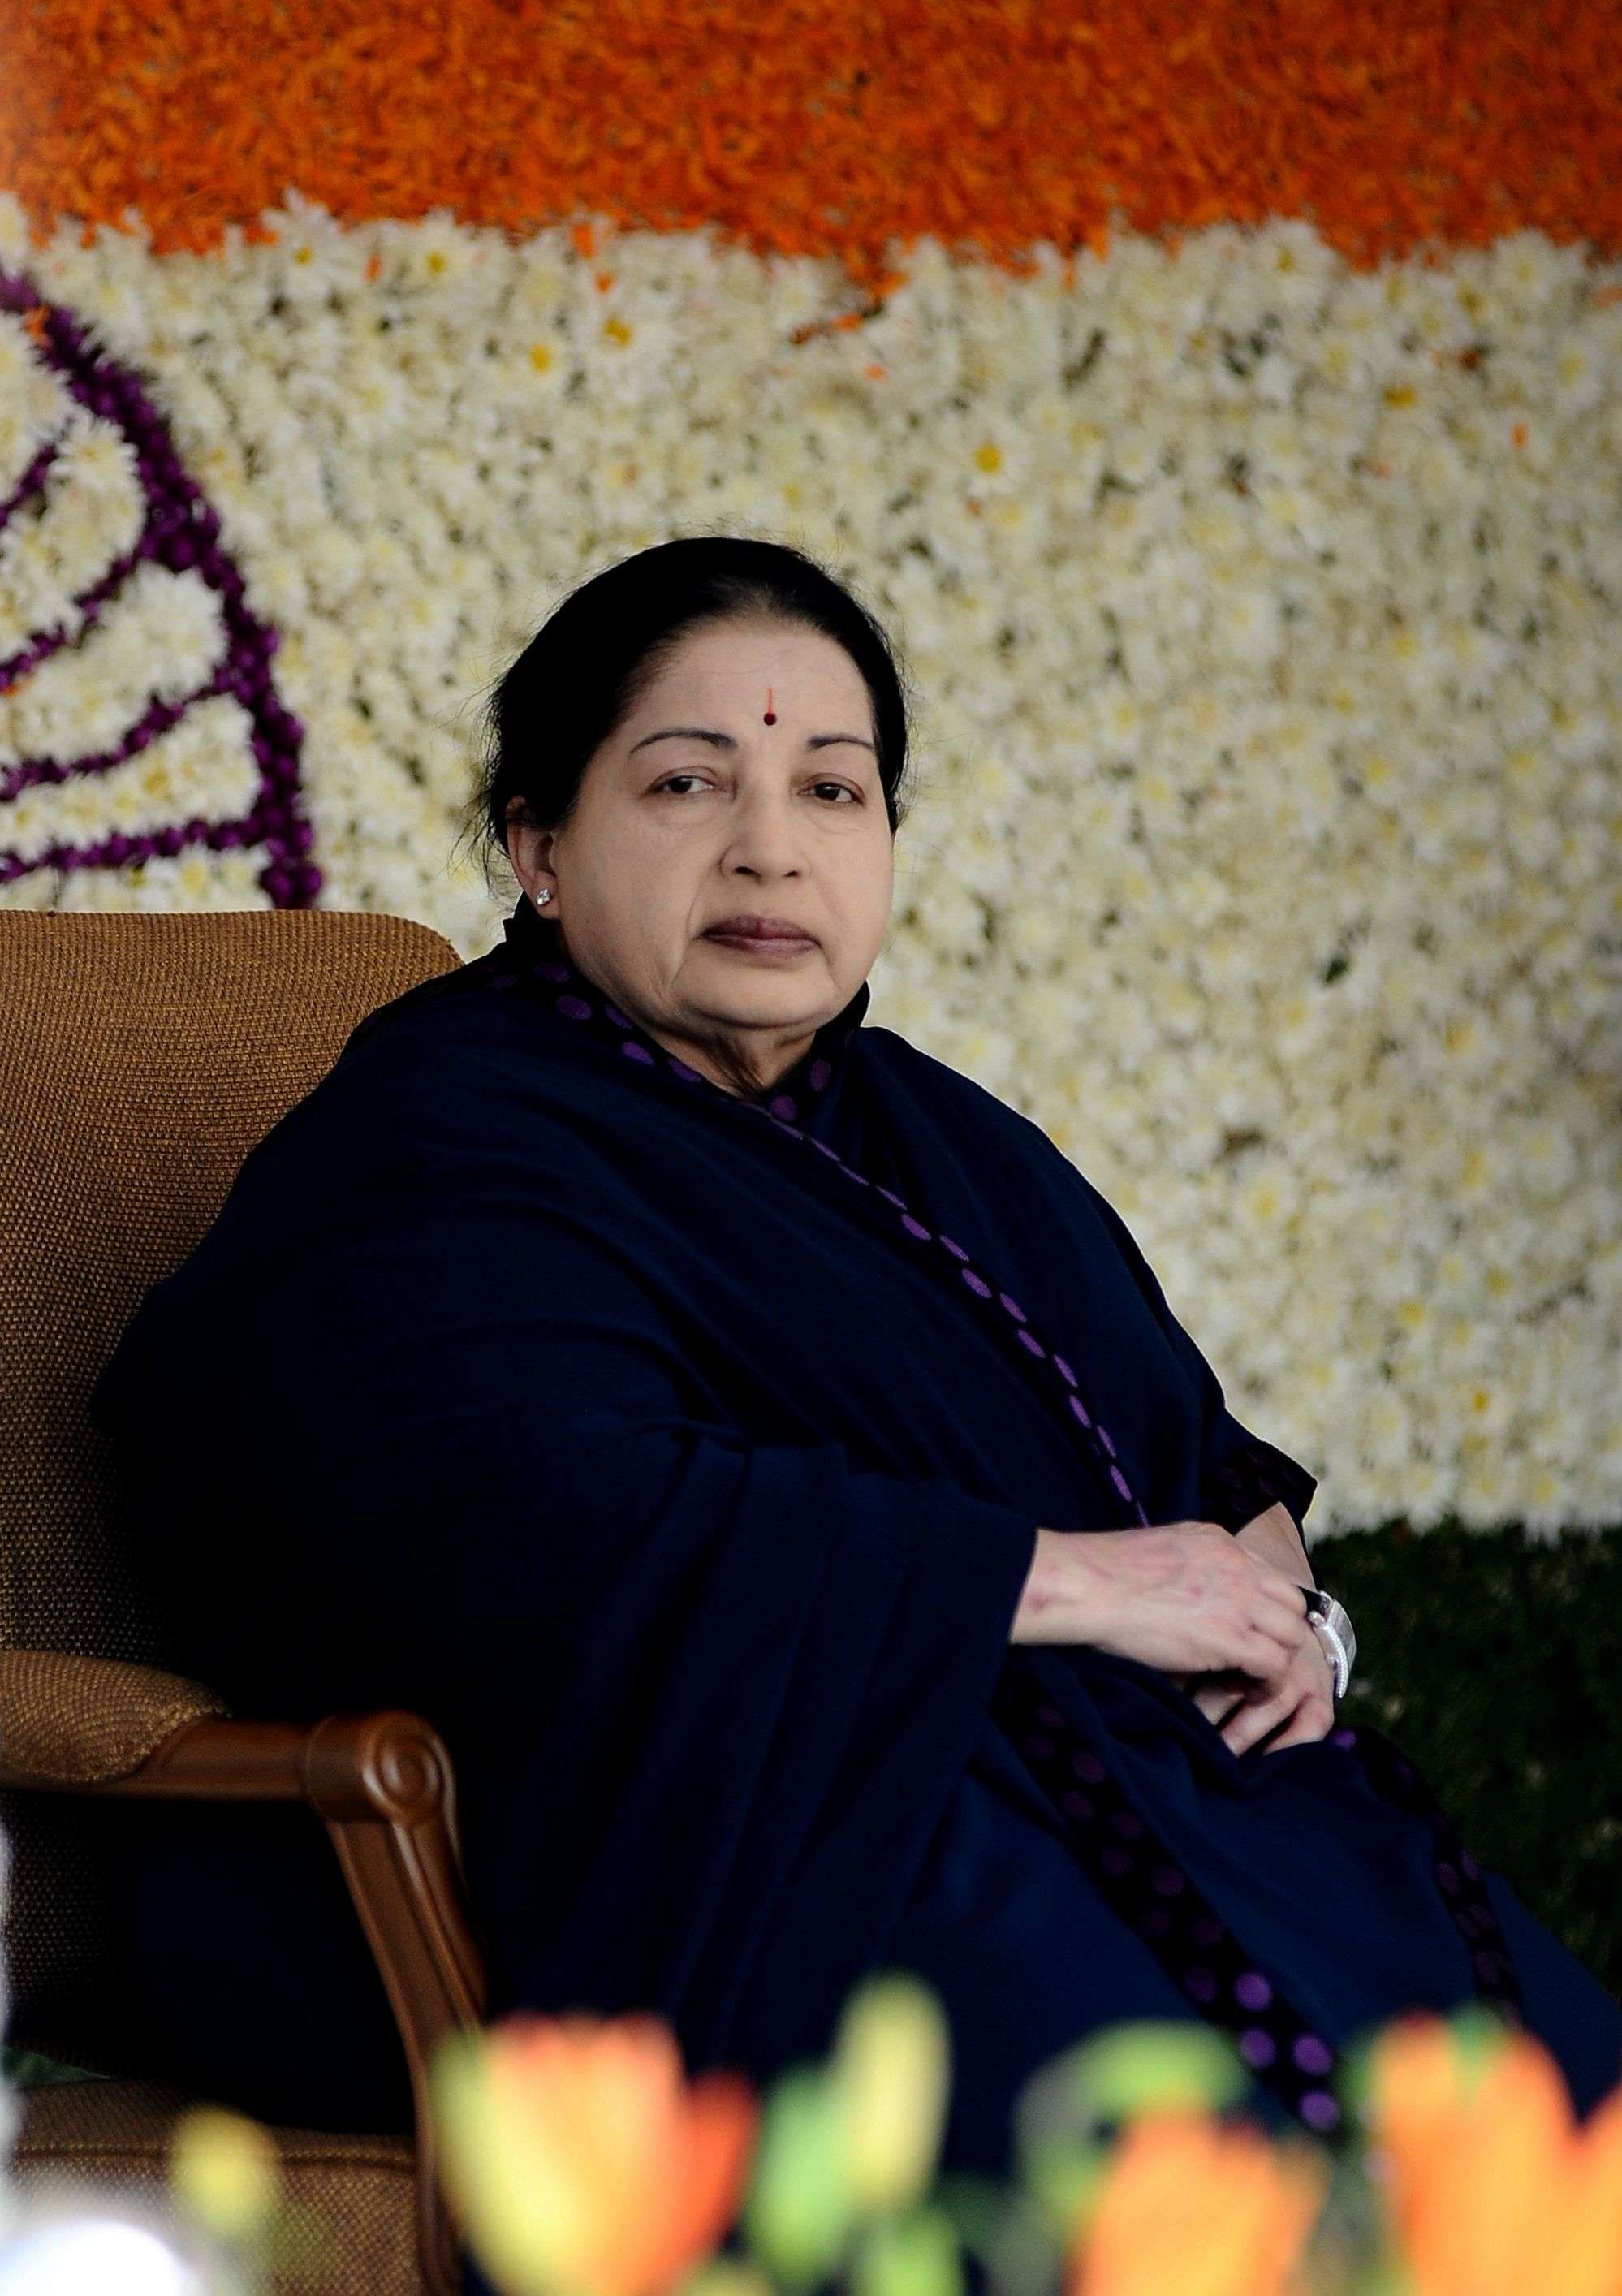 Tamil Nadu Chief Minister J Jayalalithaa during the 70th Independence Day function at Fort St George in Chennai15.08.2016.Photo: A.Prathap